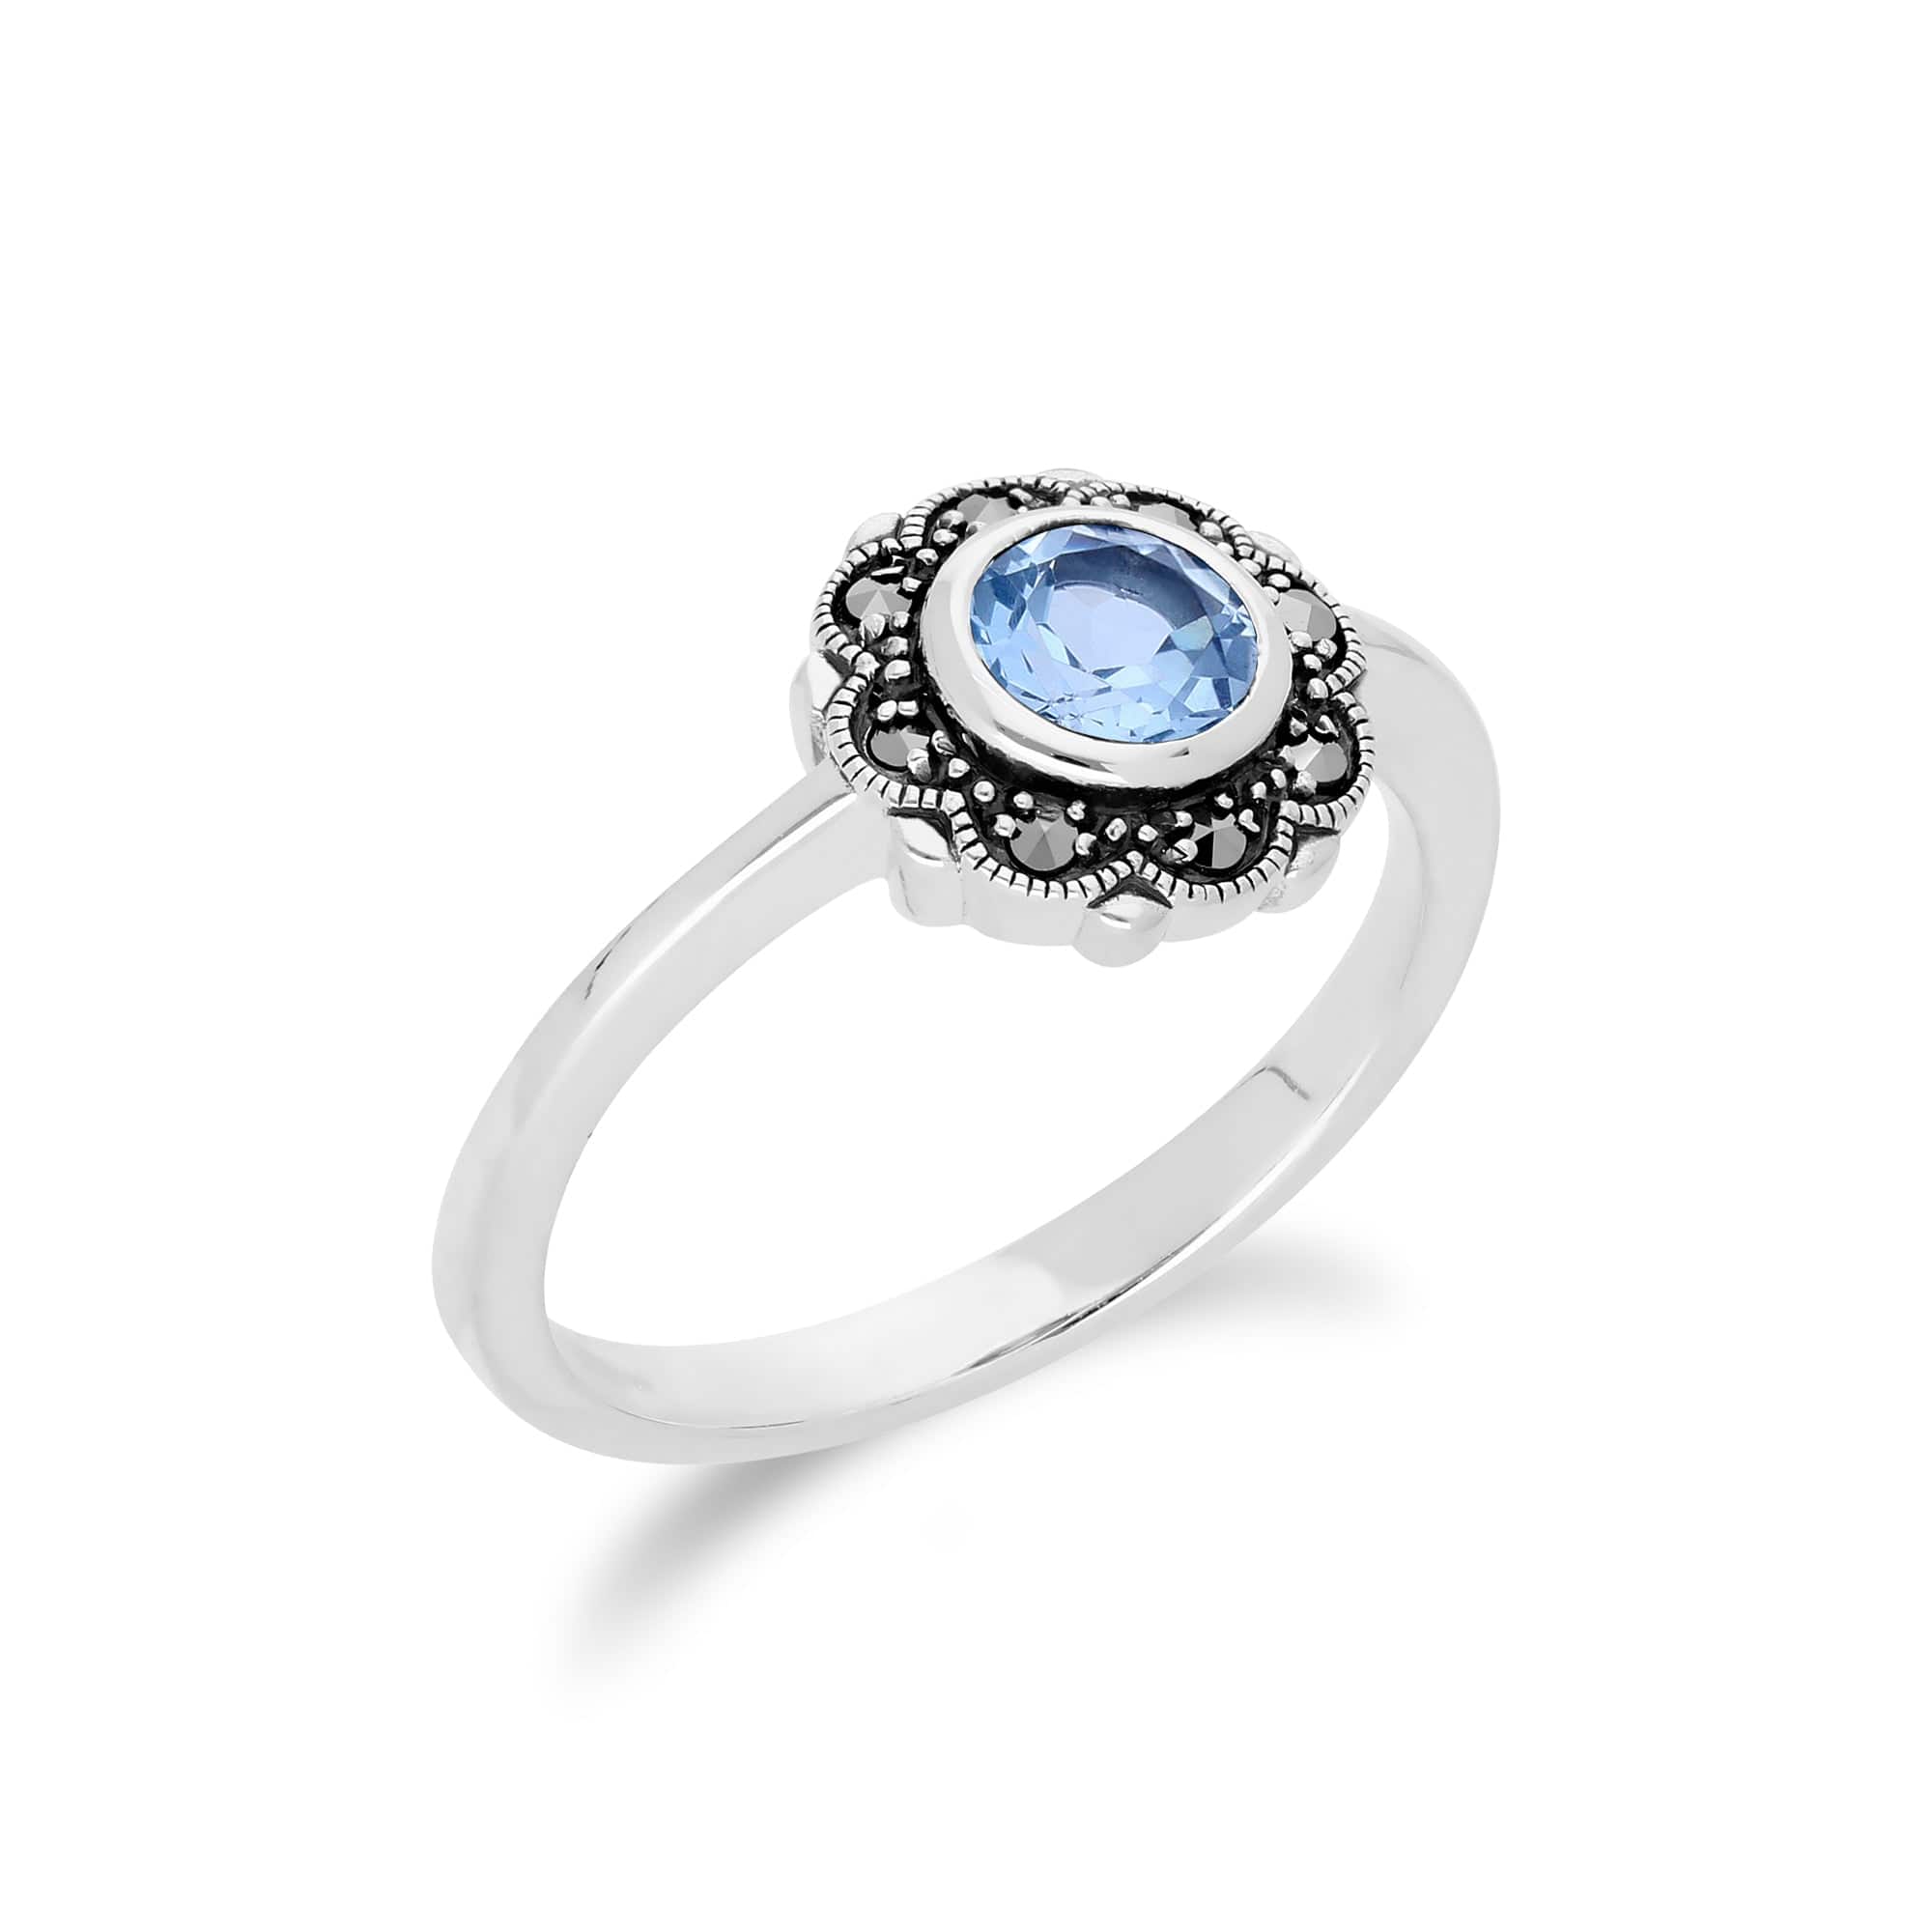 214R597003925 Floral Round Blue Topaz & Marcasite Halo Ring in 925 Sterling Silver 2